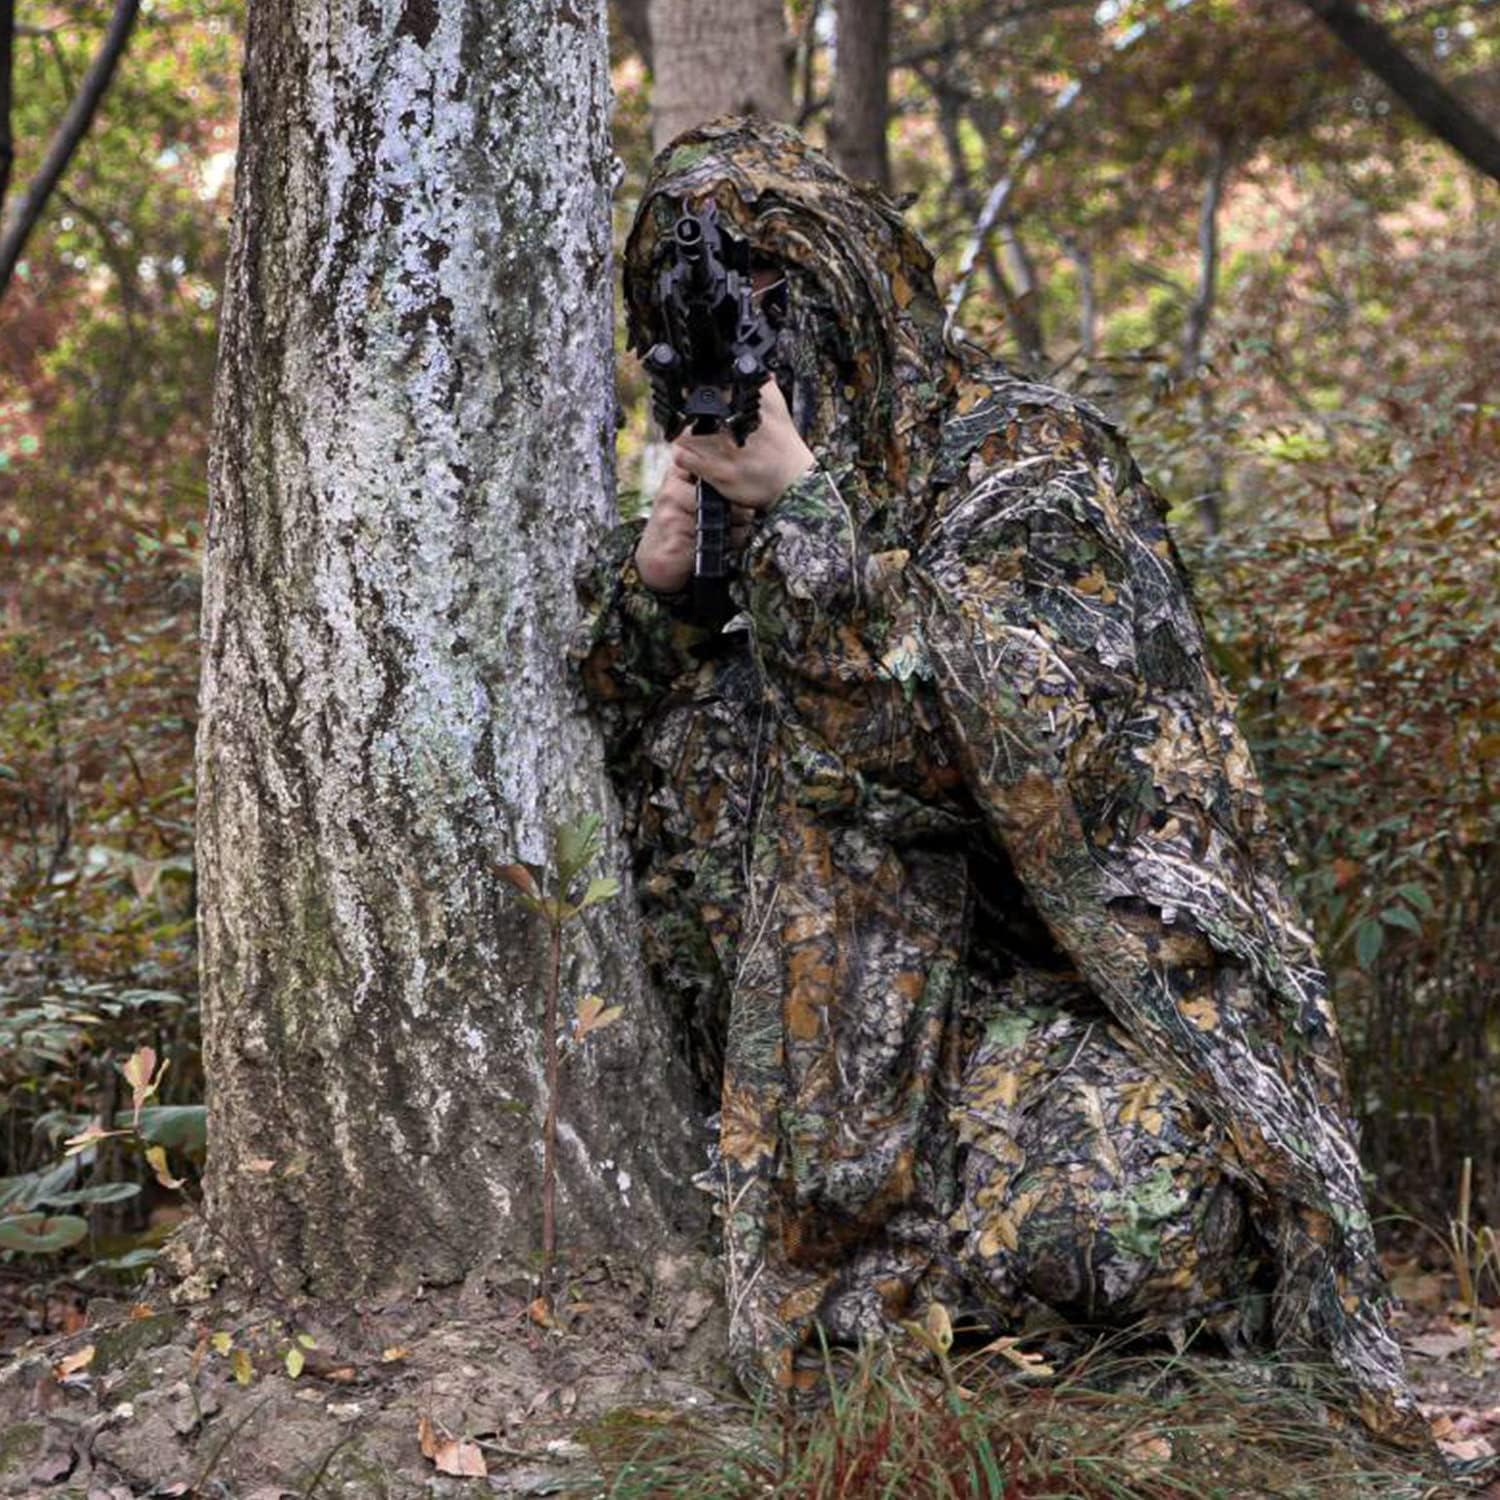 Ghillie suit - Wikipedia